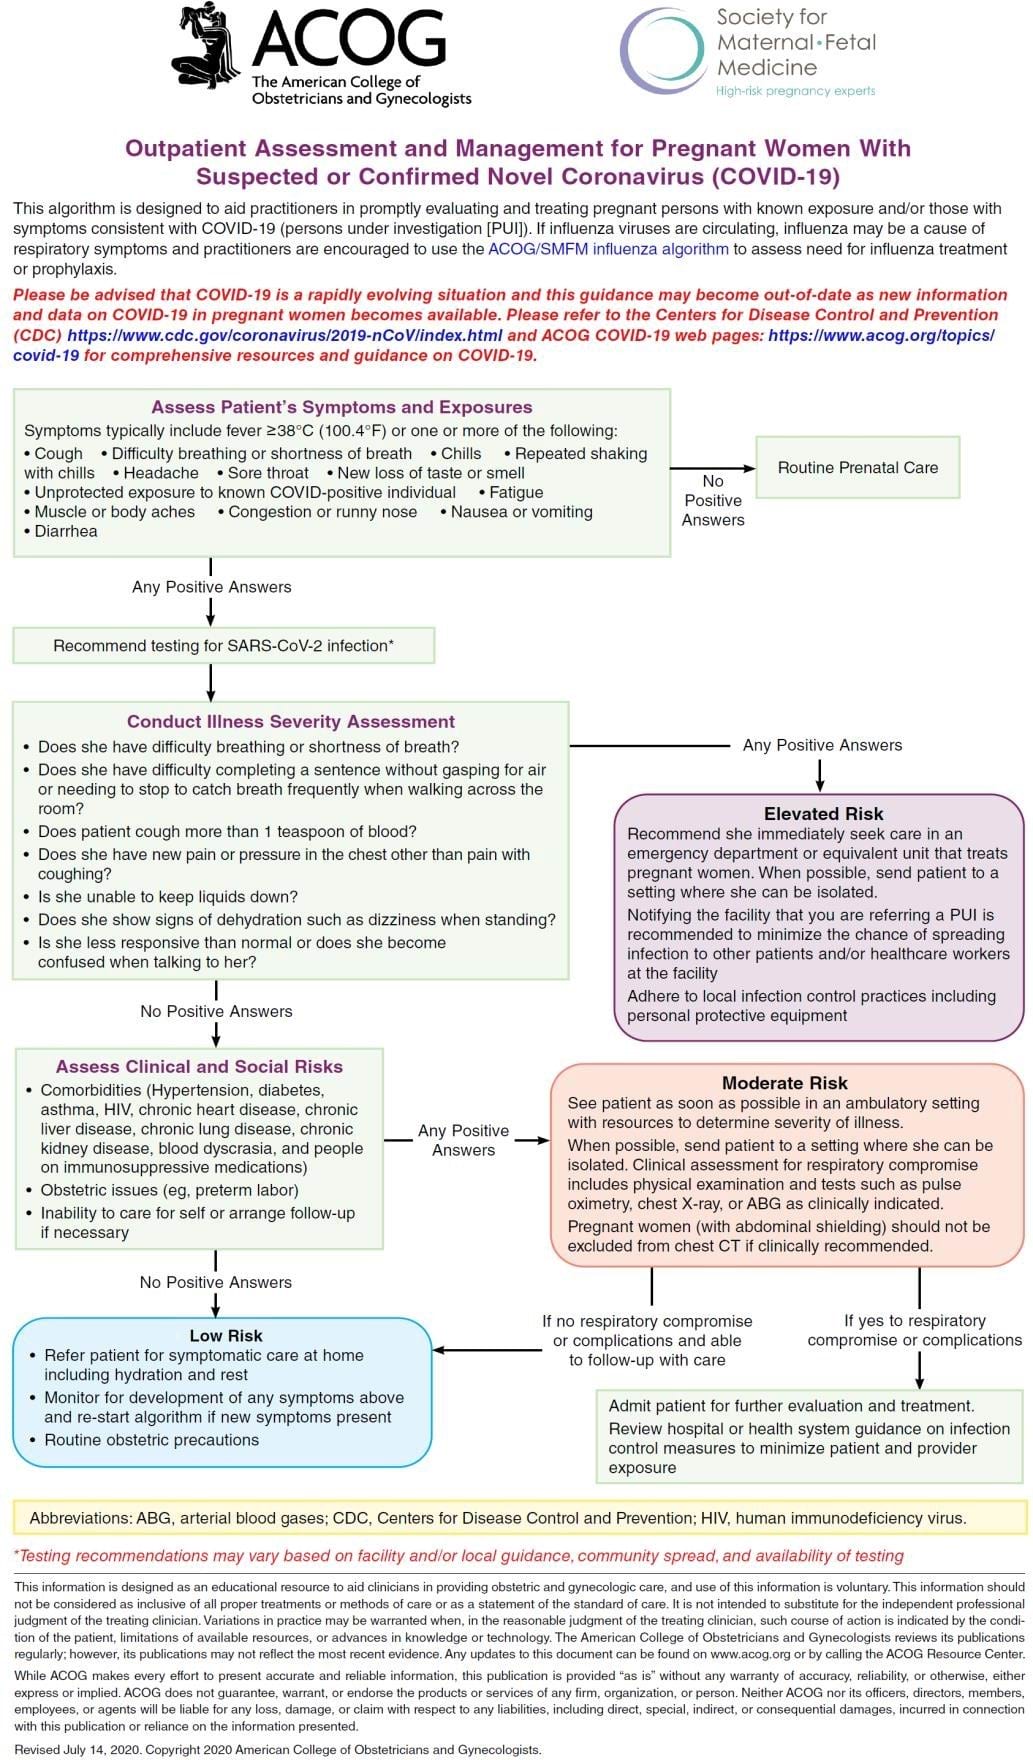 Management for pregnant women with suspected or confirmed COVID-19